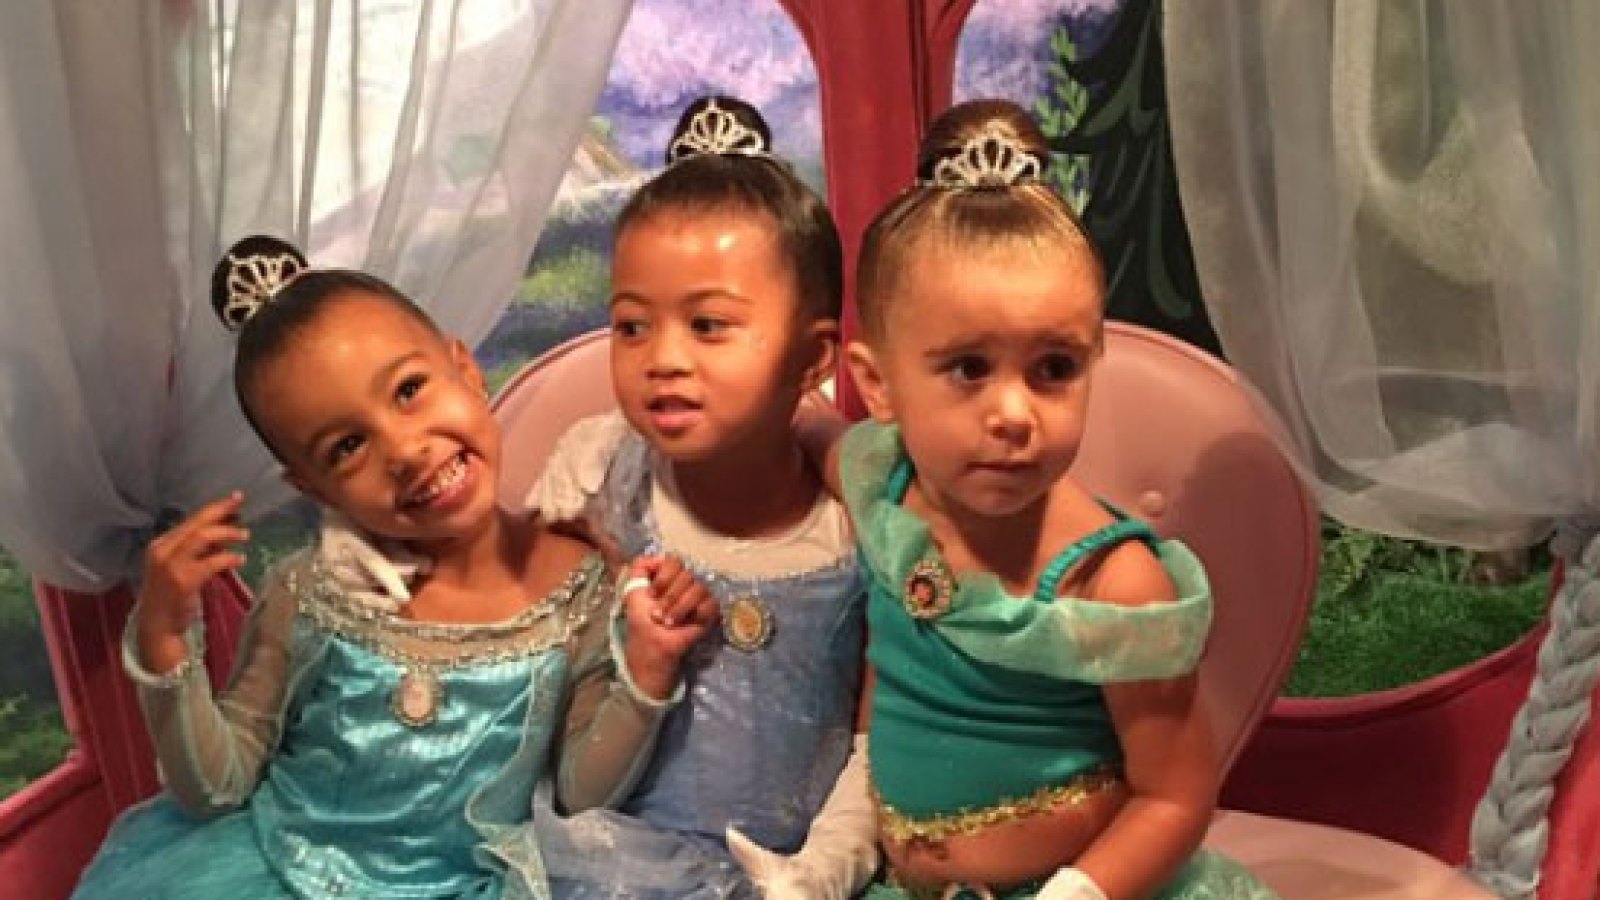 North West and Penelop Disick have princess makeovers at Disneyland